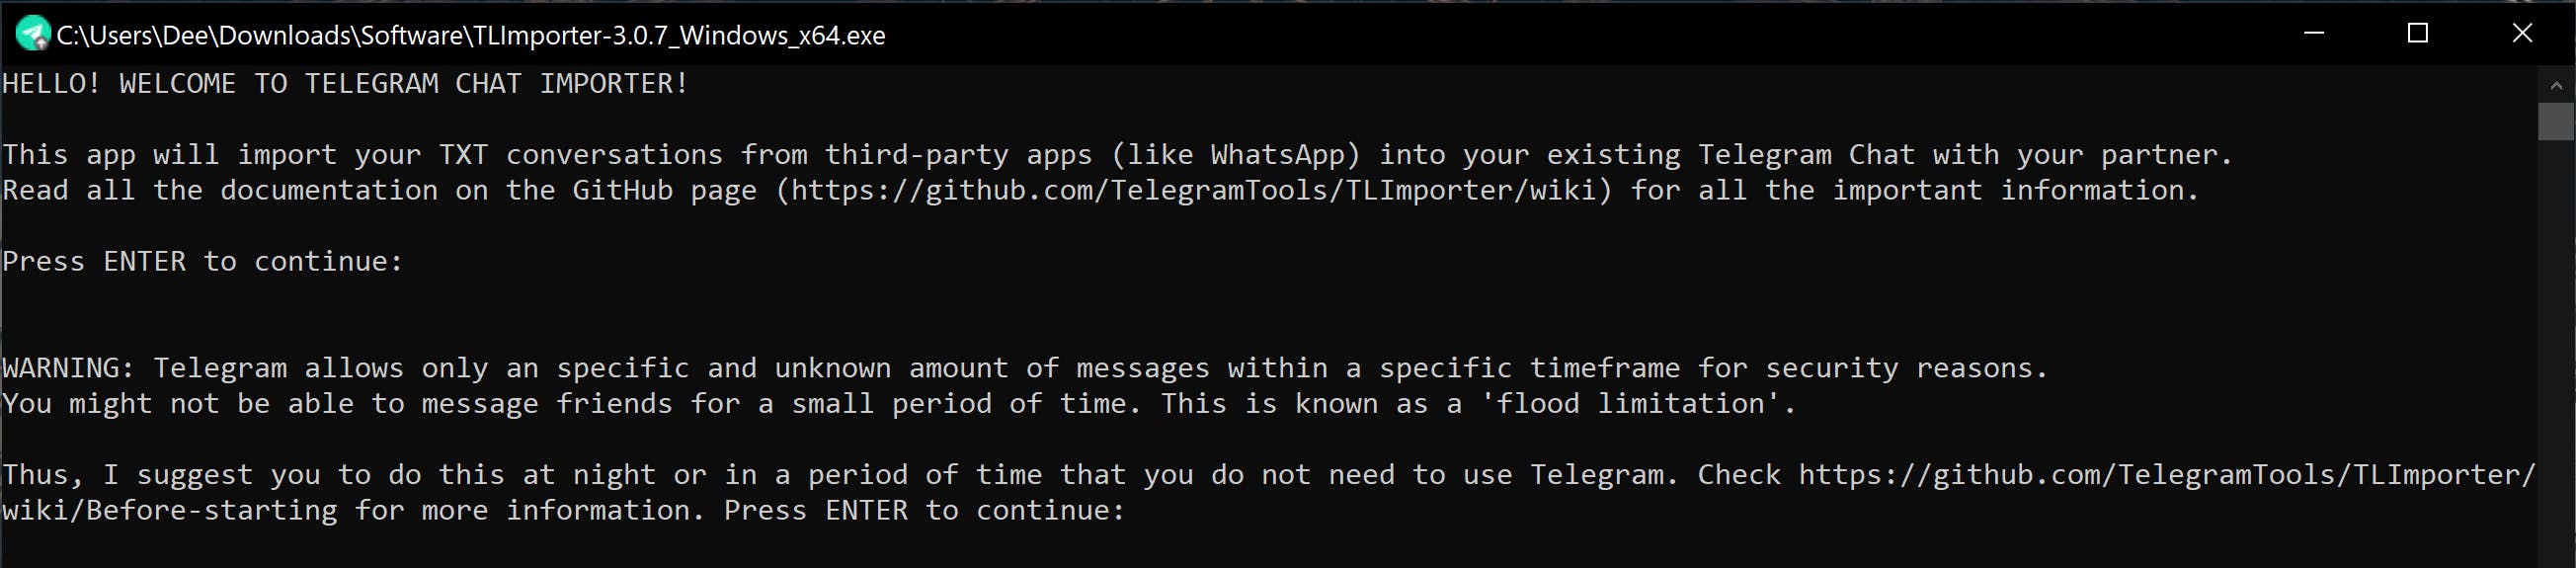 TLImporter welcome message and prompts